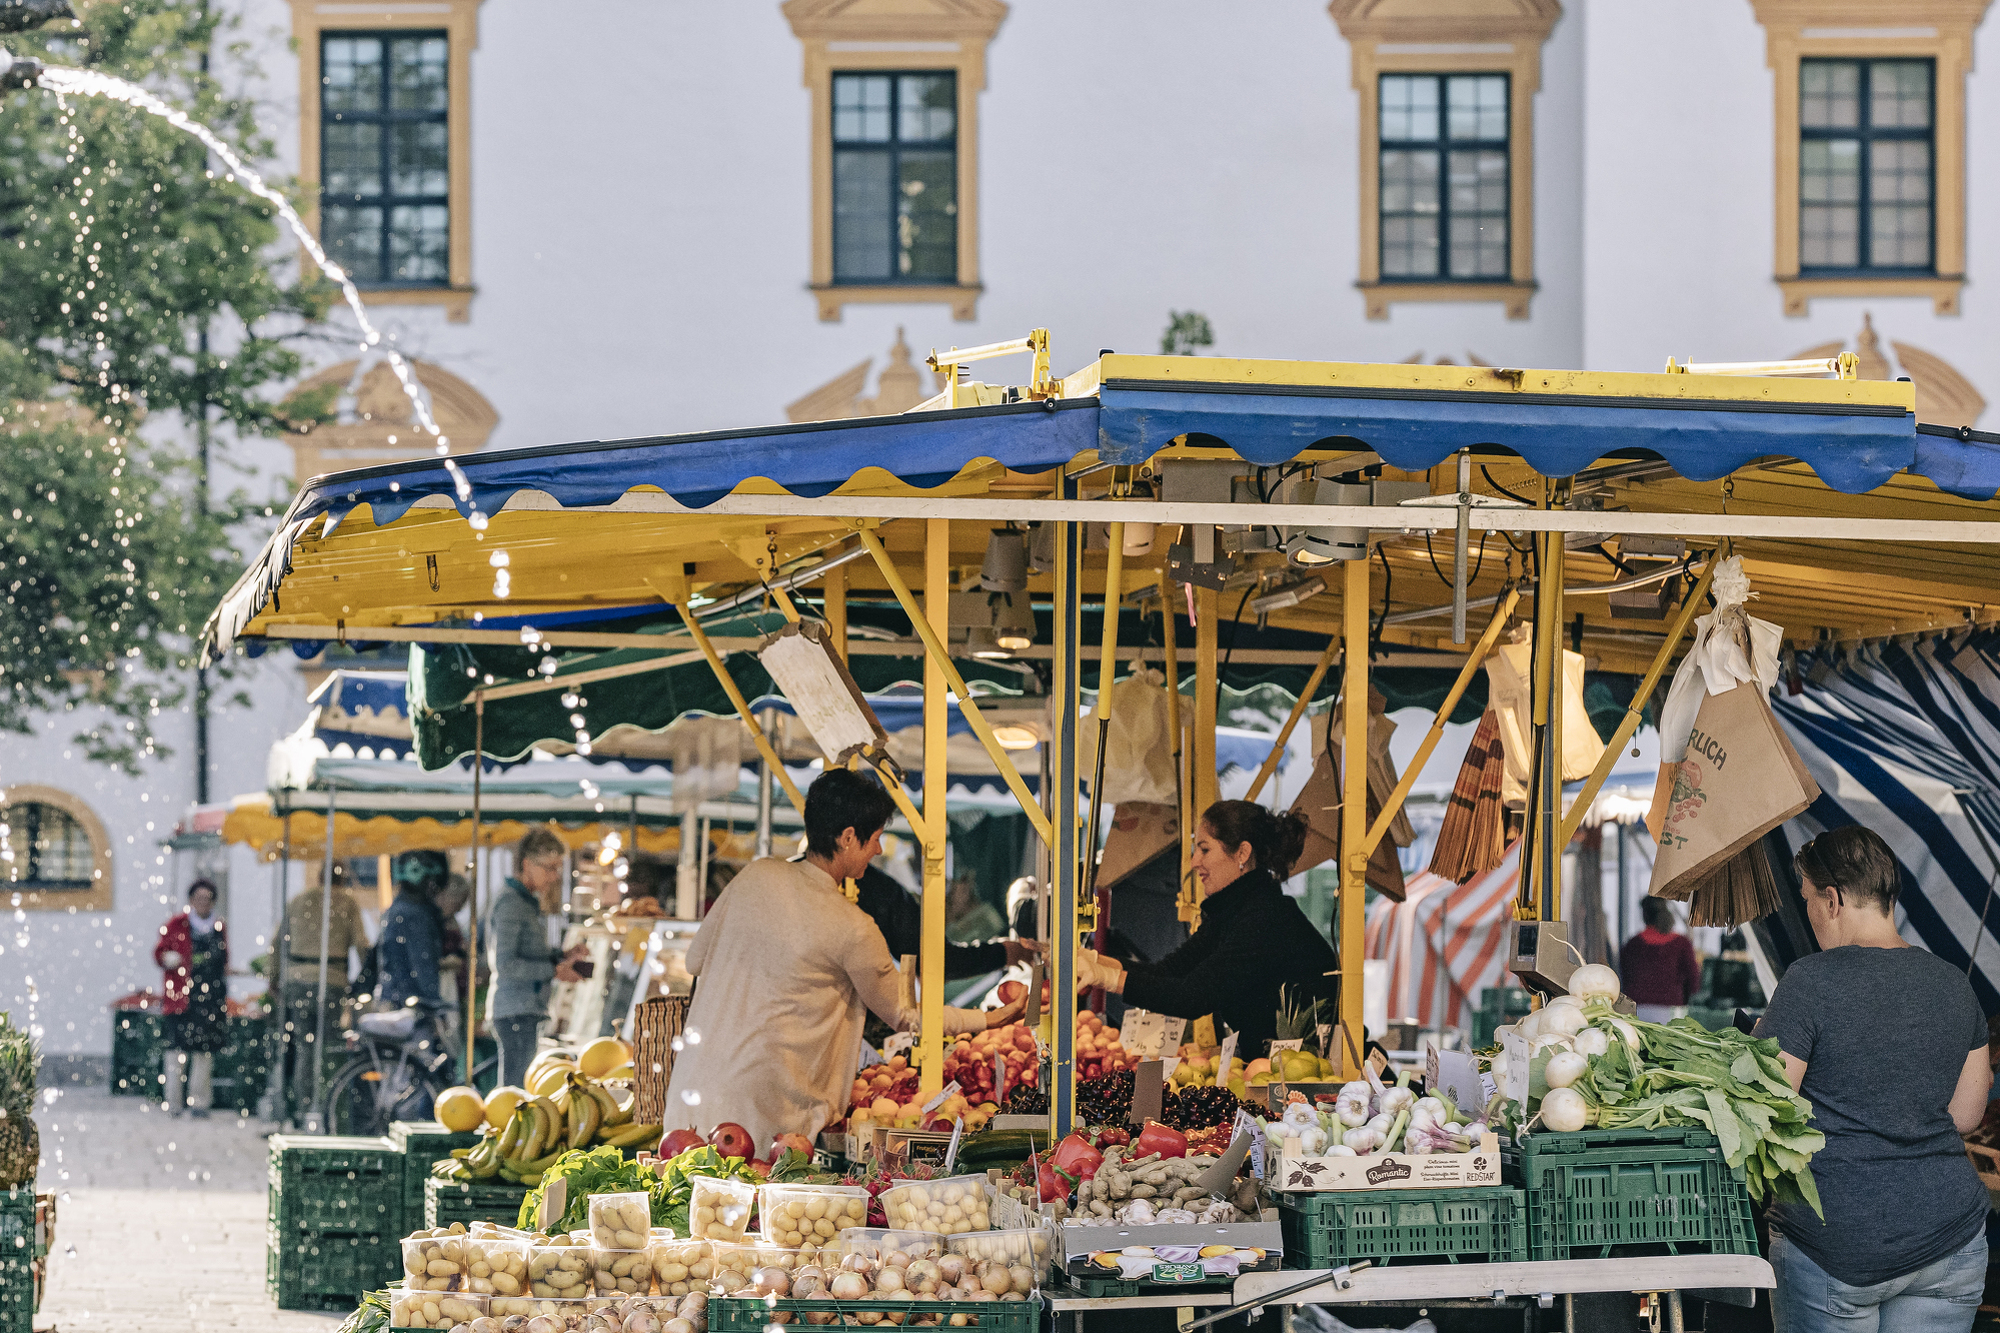 Kempten's weekly market in front of the Residence